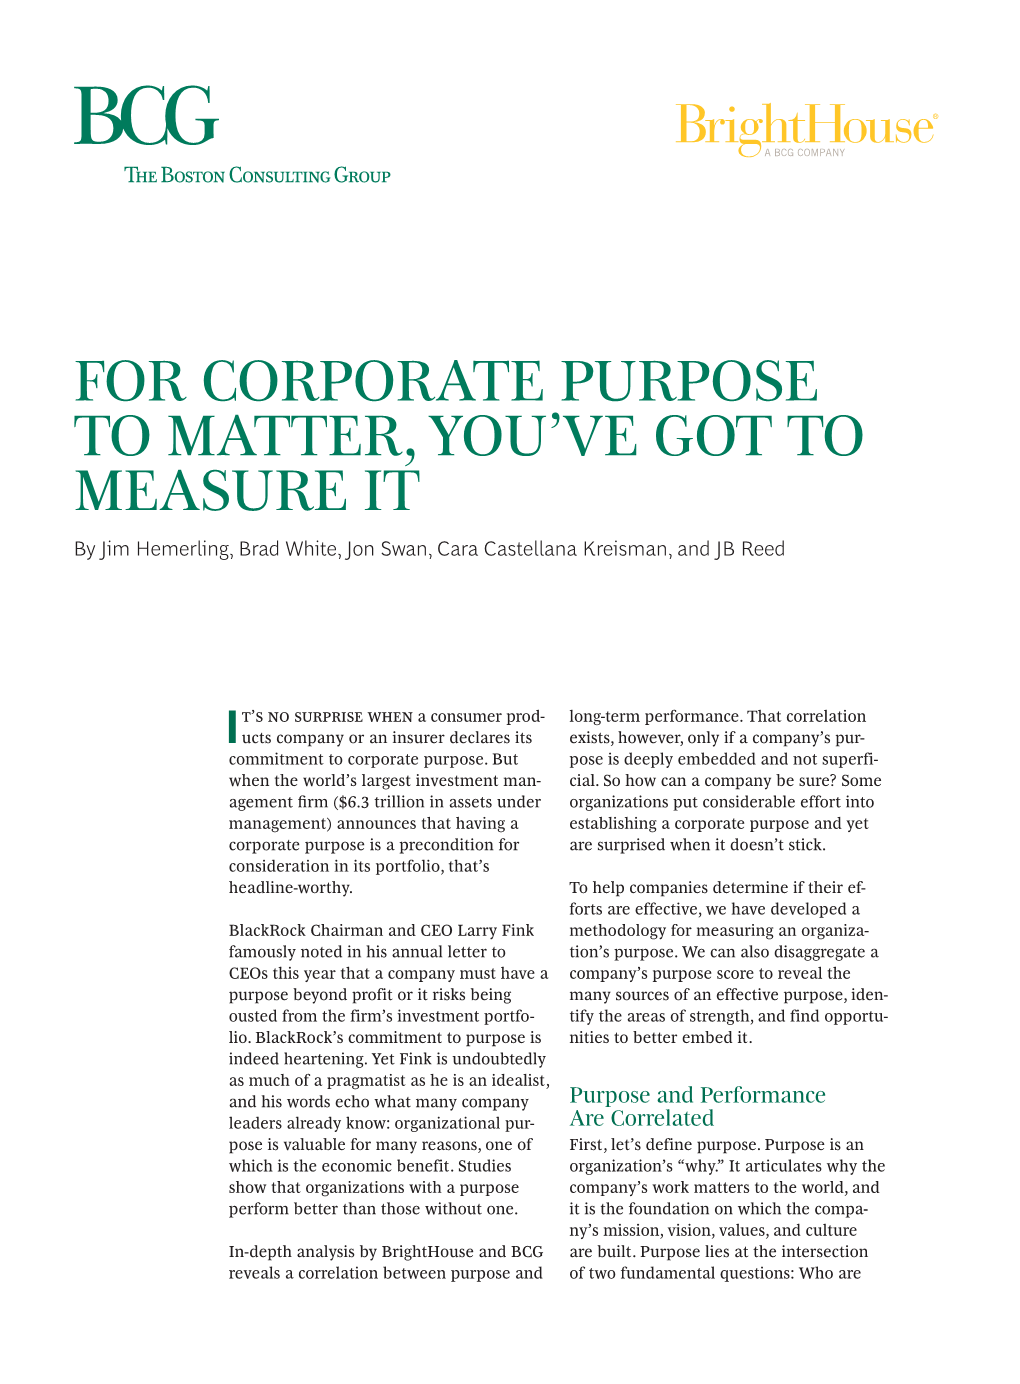 For Corporate Purpose to Matter, You've Got to Measure It